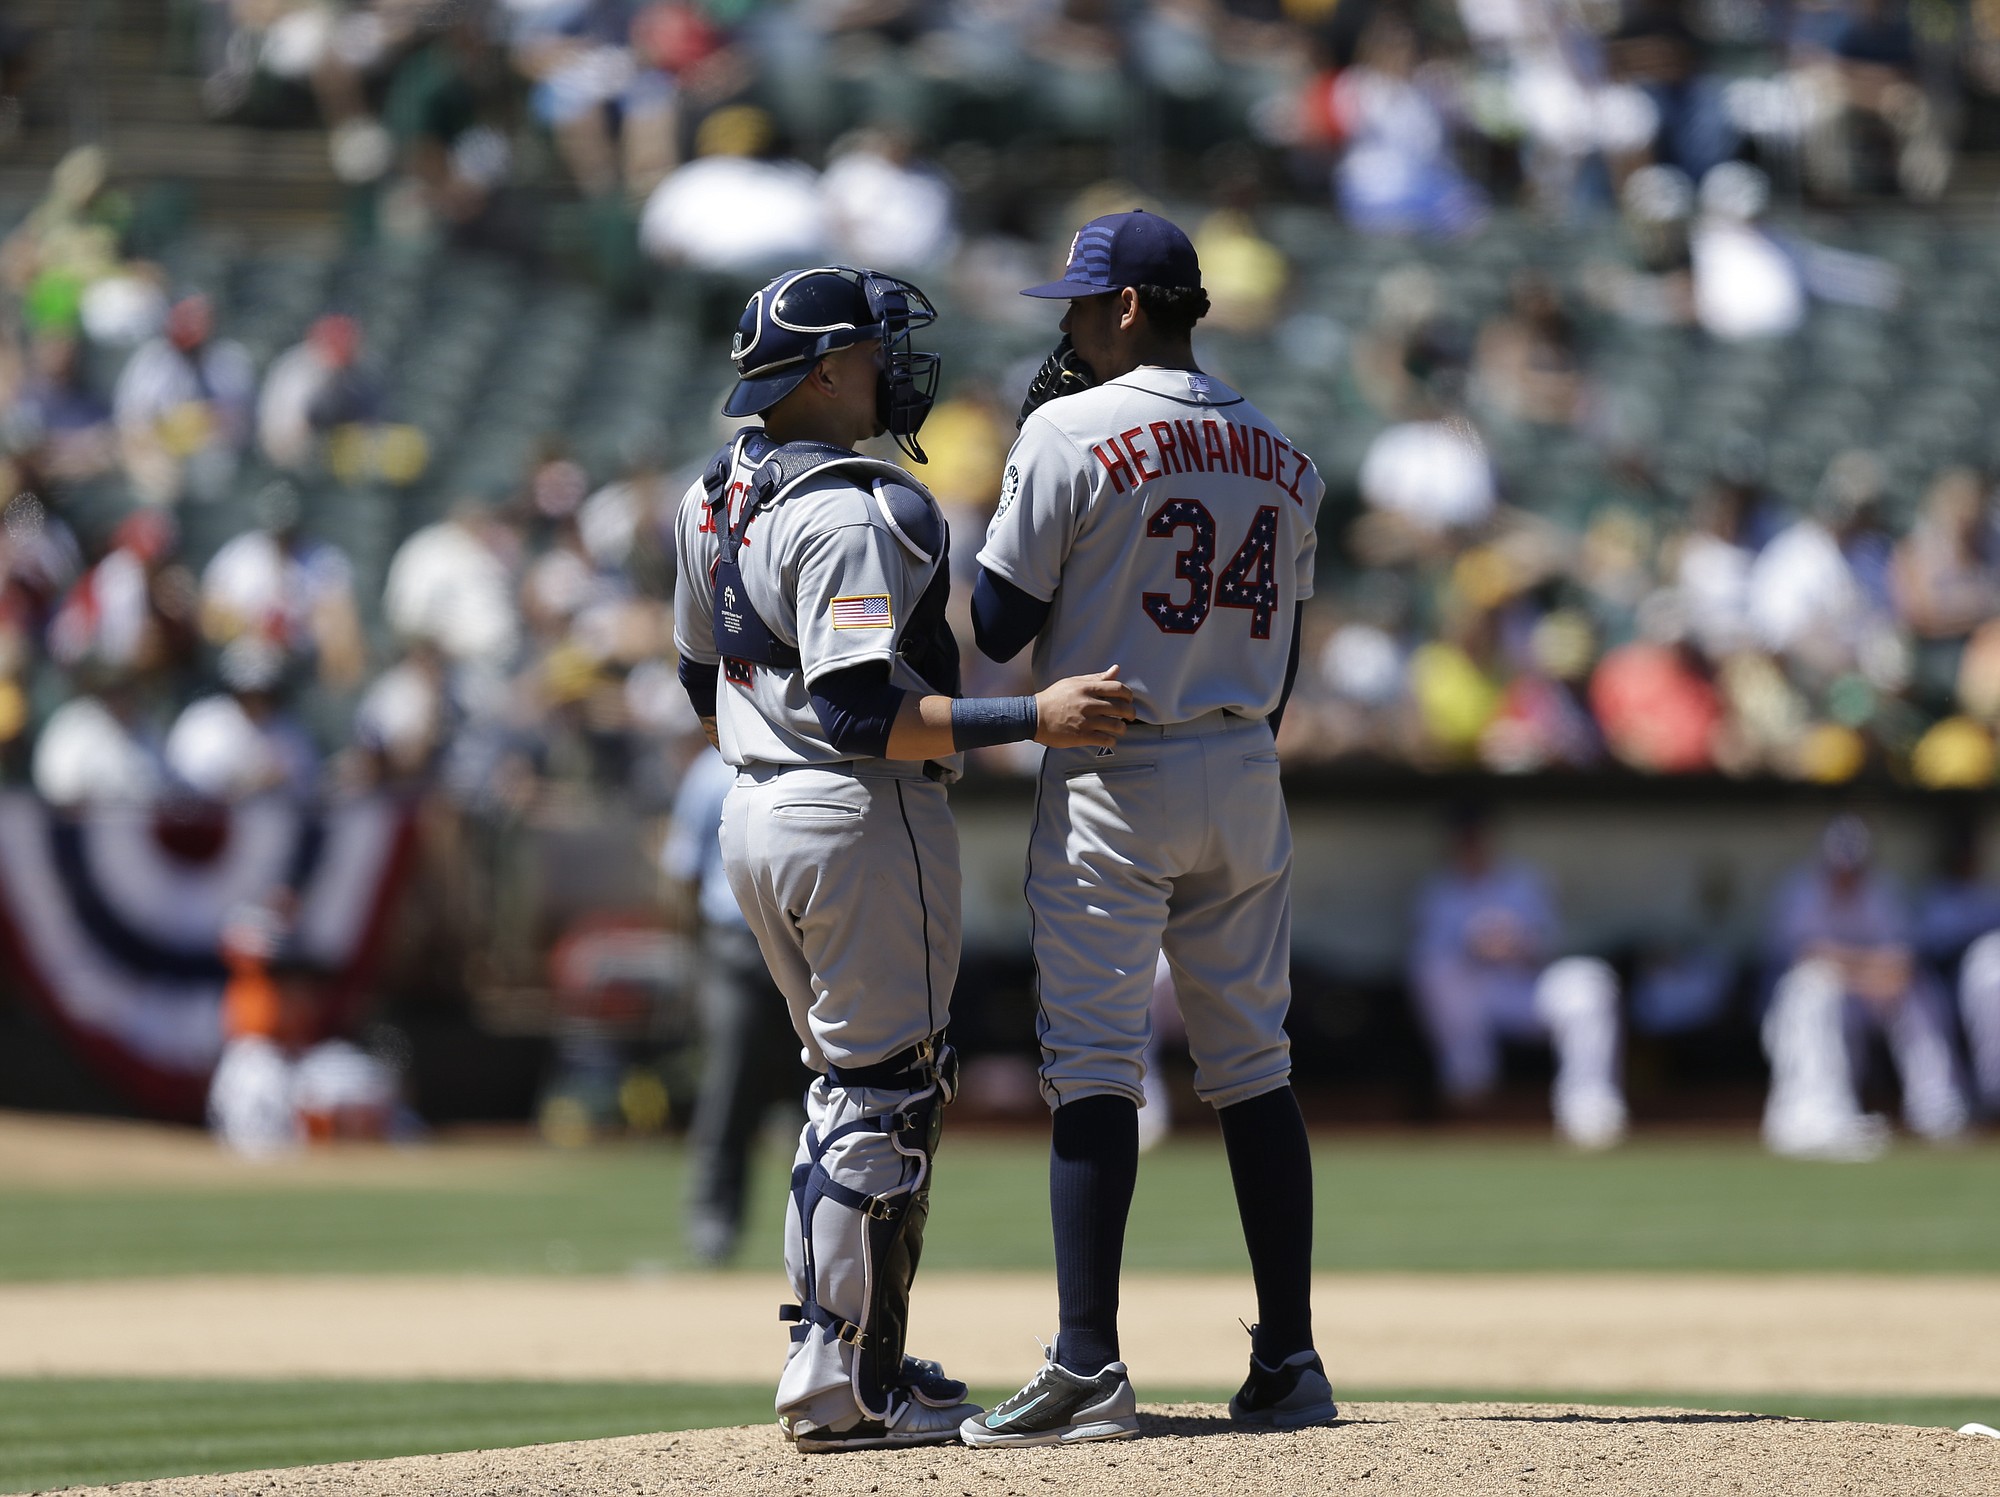 Seattle Mariners' Felix Hernandez (34) and Jesus Sucre speak on the mound in the third inning against the Oakland Athletics on Saturday, July 4, 2015, in Oakland, Calif.